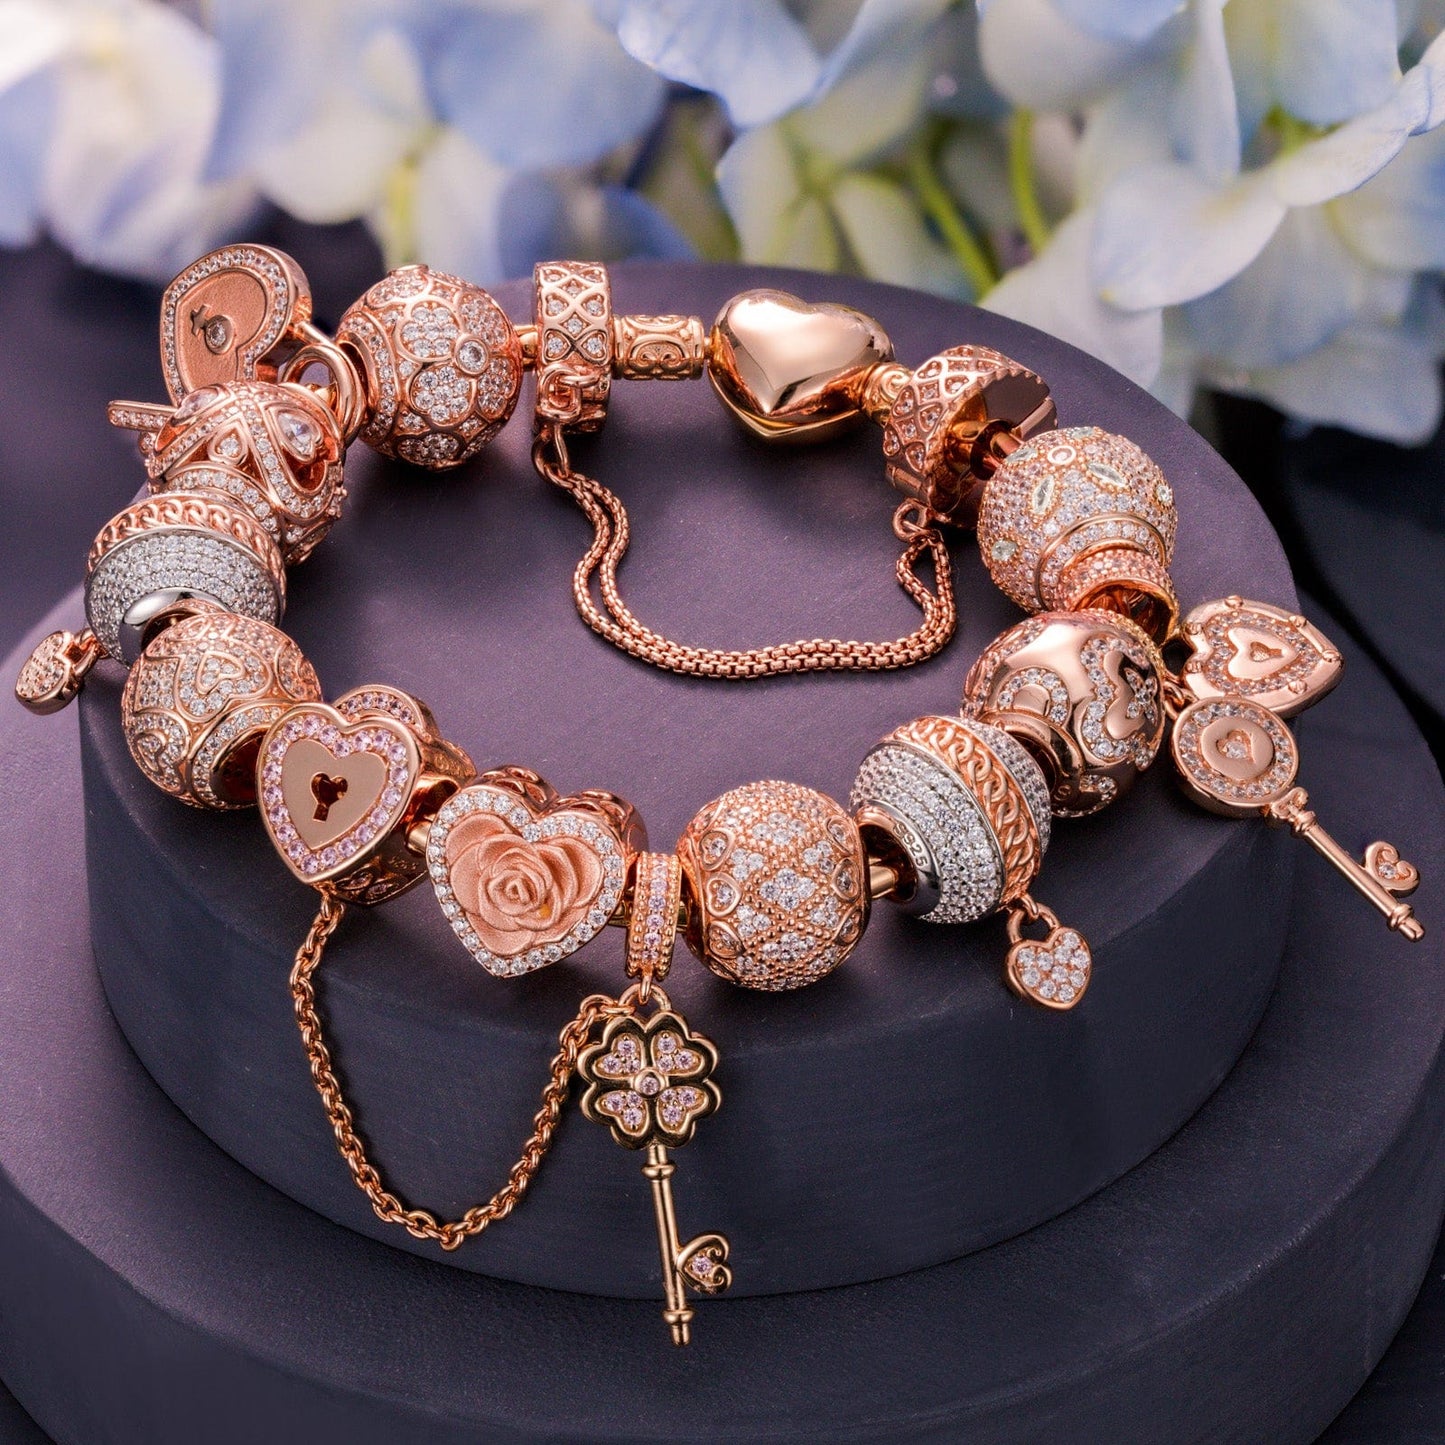 Sterling Silver Rose in the Heart Charms Bracelet Set In Rose Gold Plated